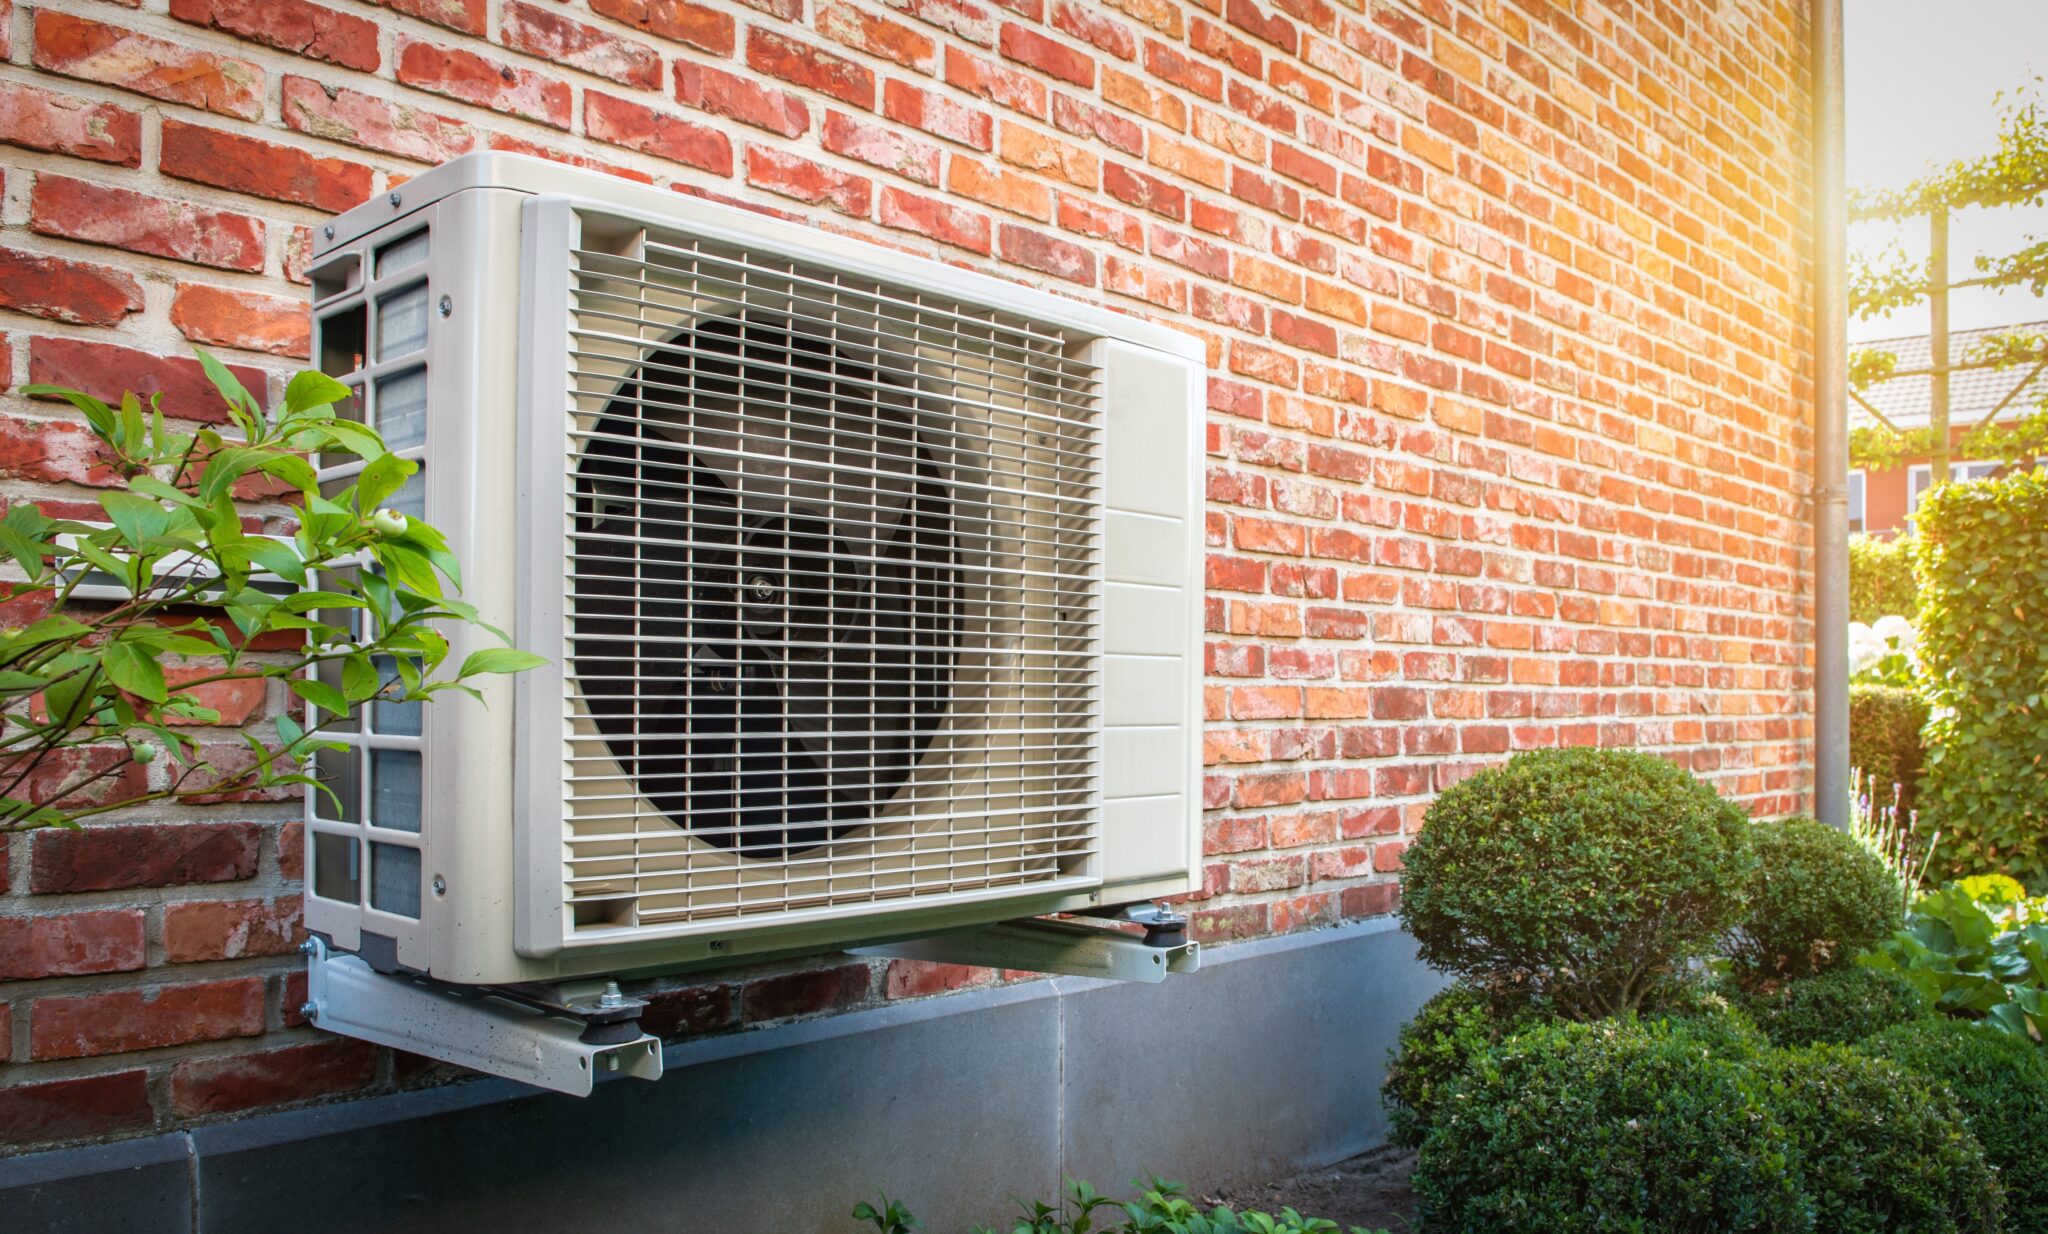 A heat pump installed outside of a home